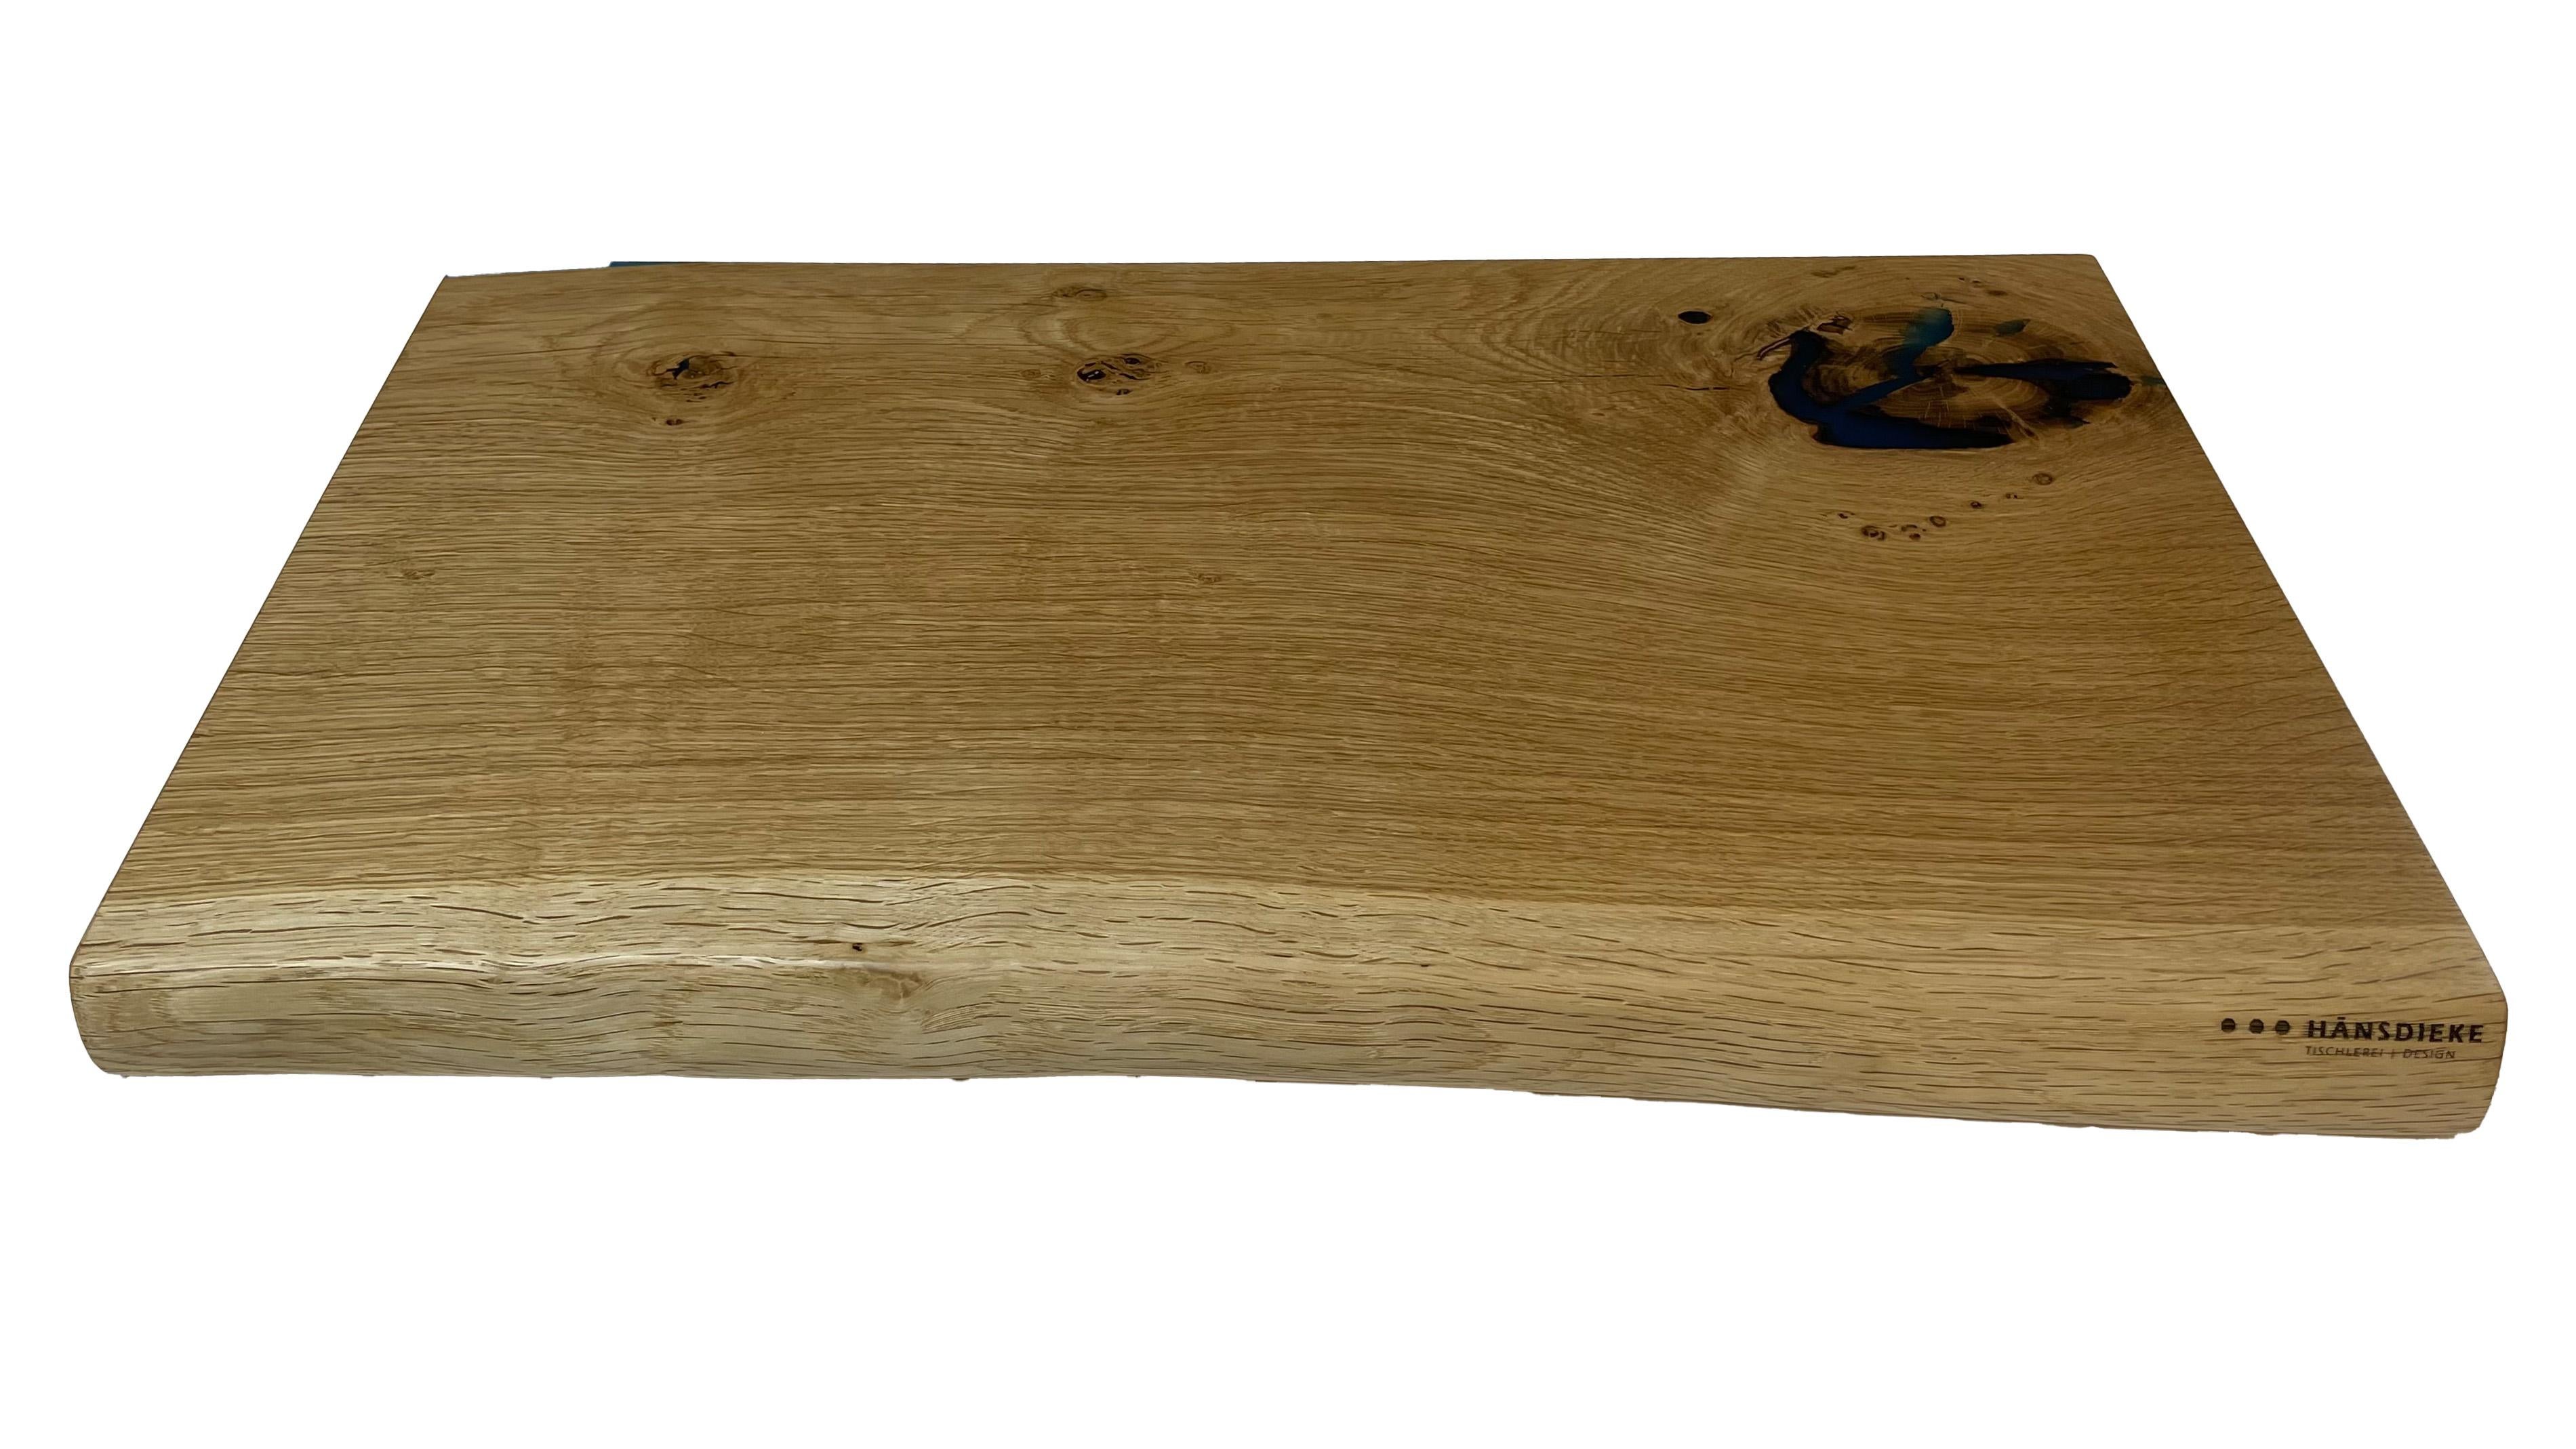 The oak cutting board was glued in multiple layers and cracks, knots, etc. were filled with high-quality epoxy. The surfaces are very finely sanded and sealed with oil. One edge has a rounding. The sides are straight and are ideal for bread and cuts